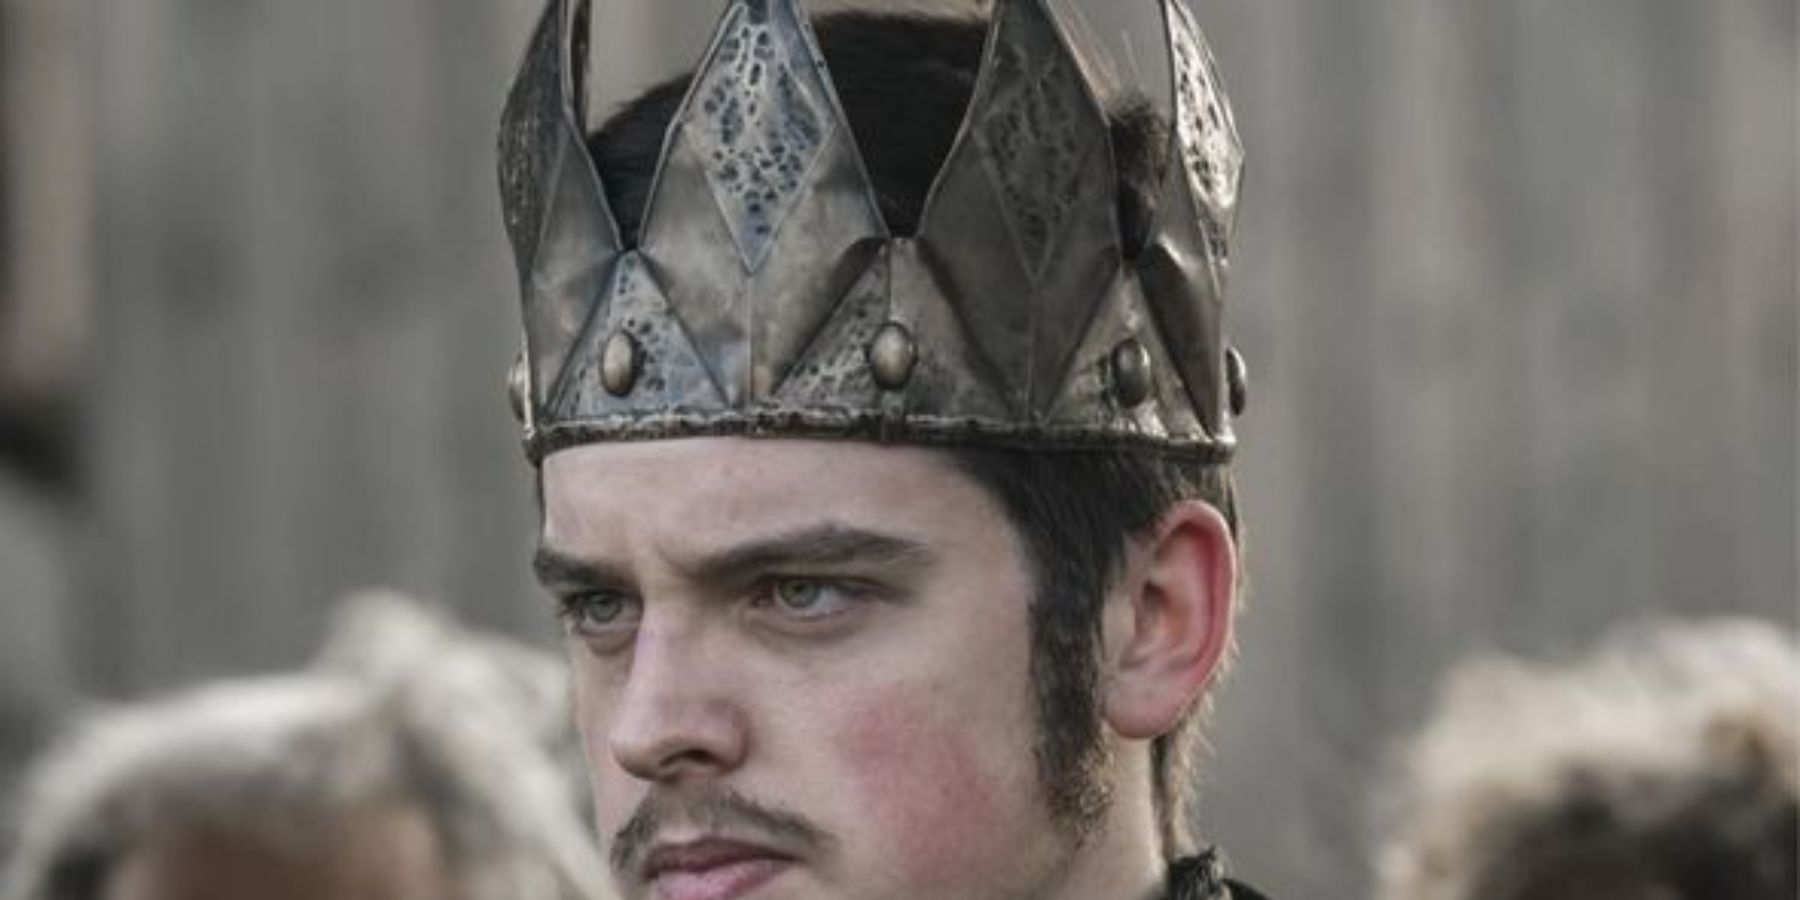 King Alfred from the Vikings television series.